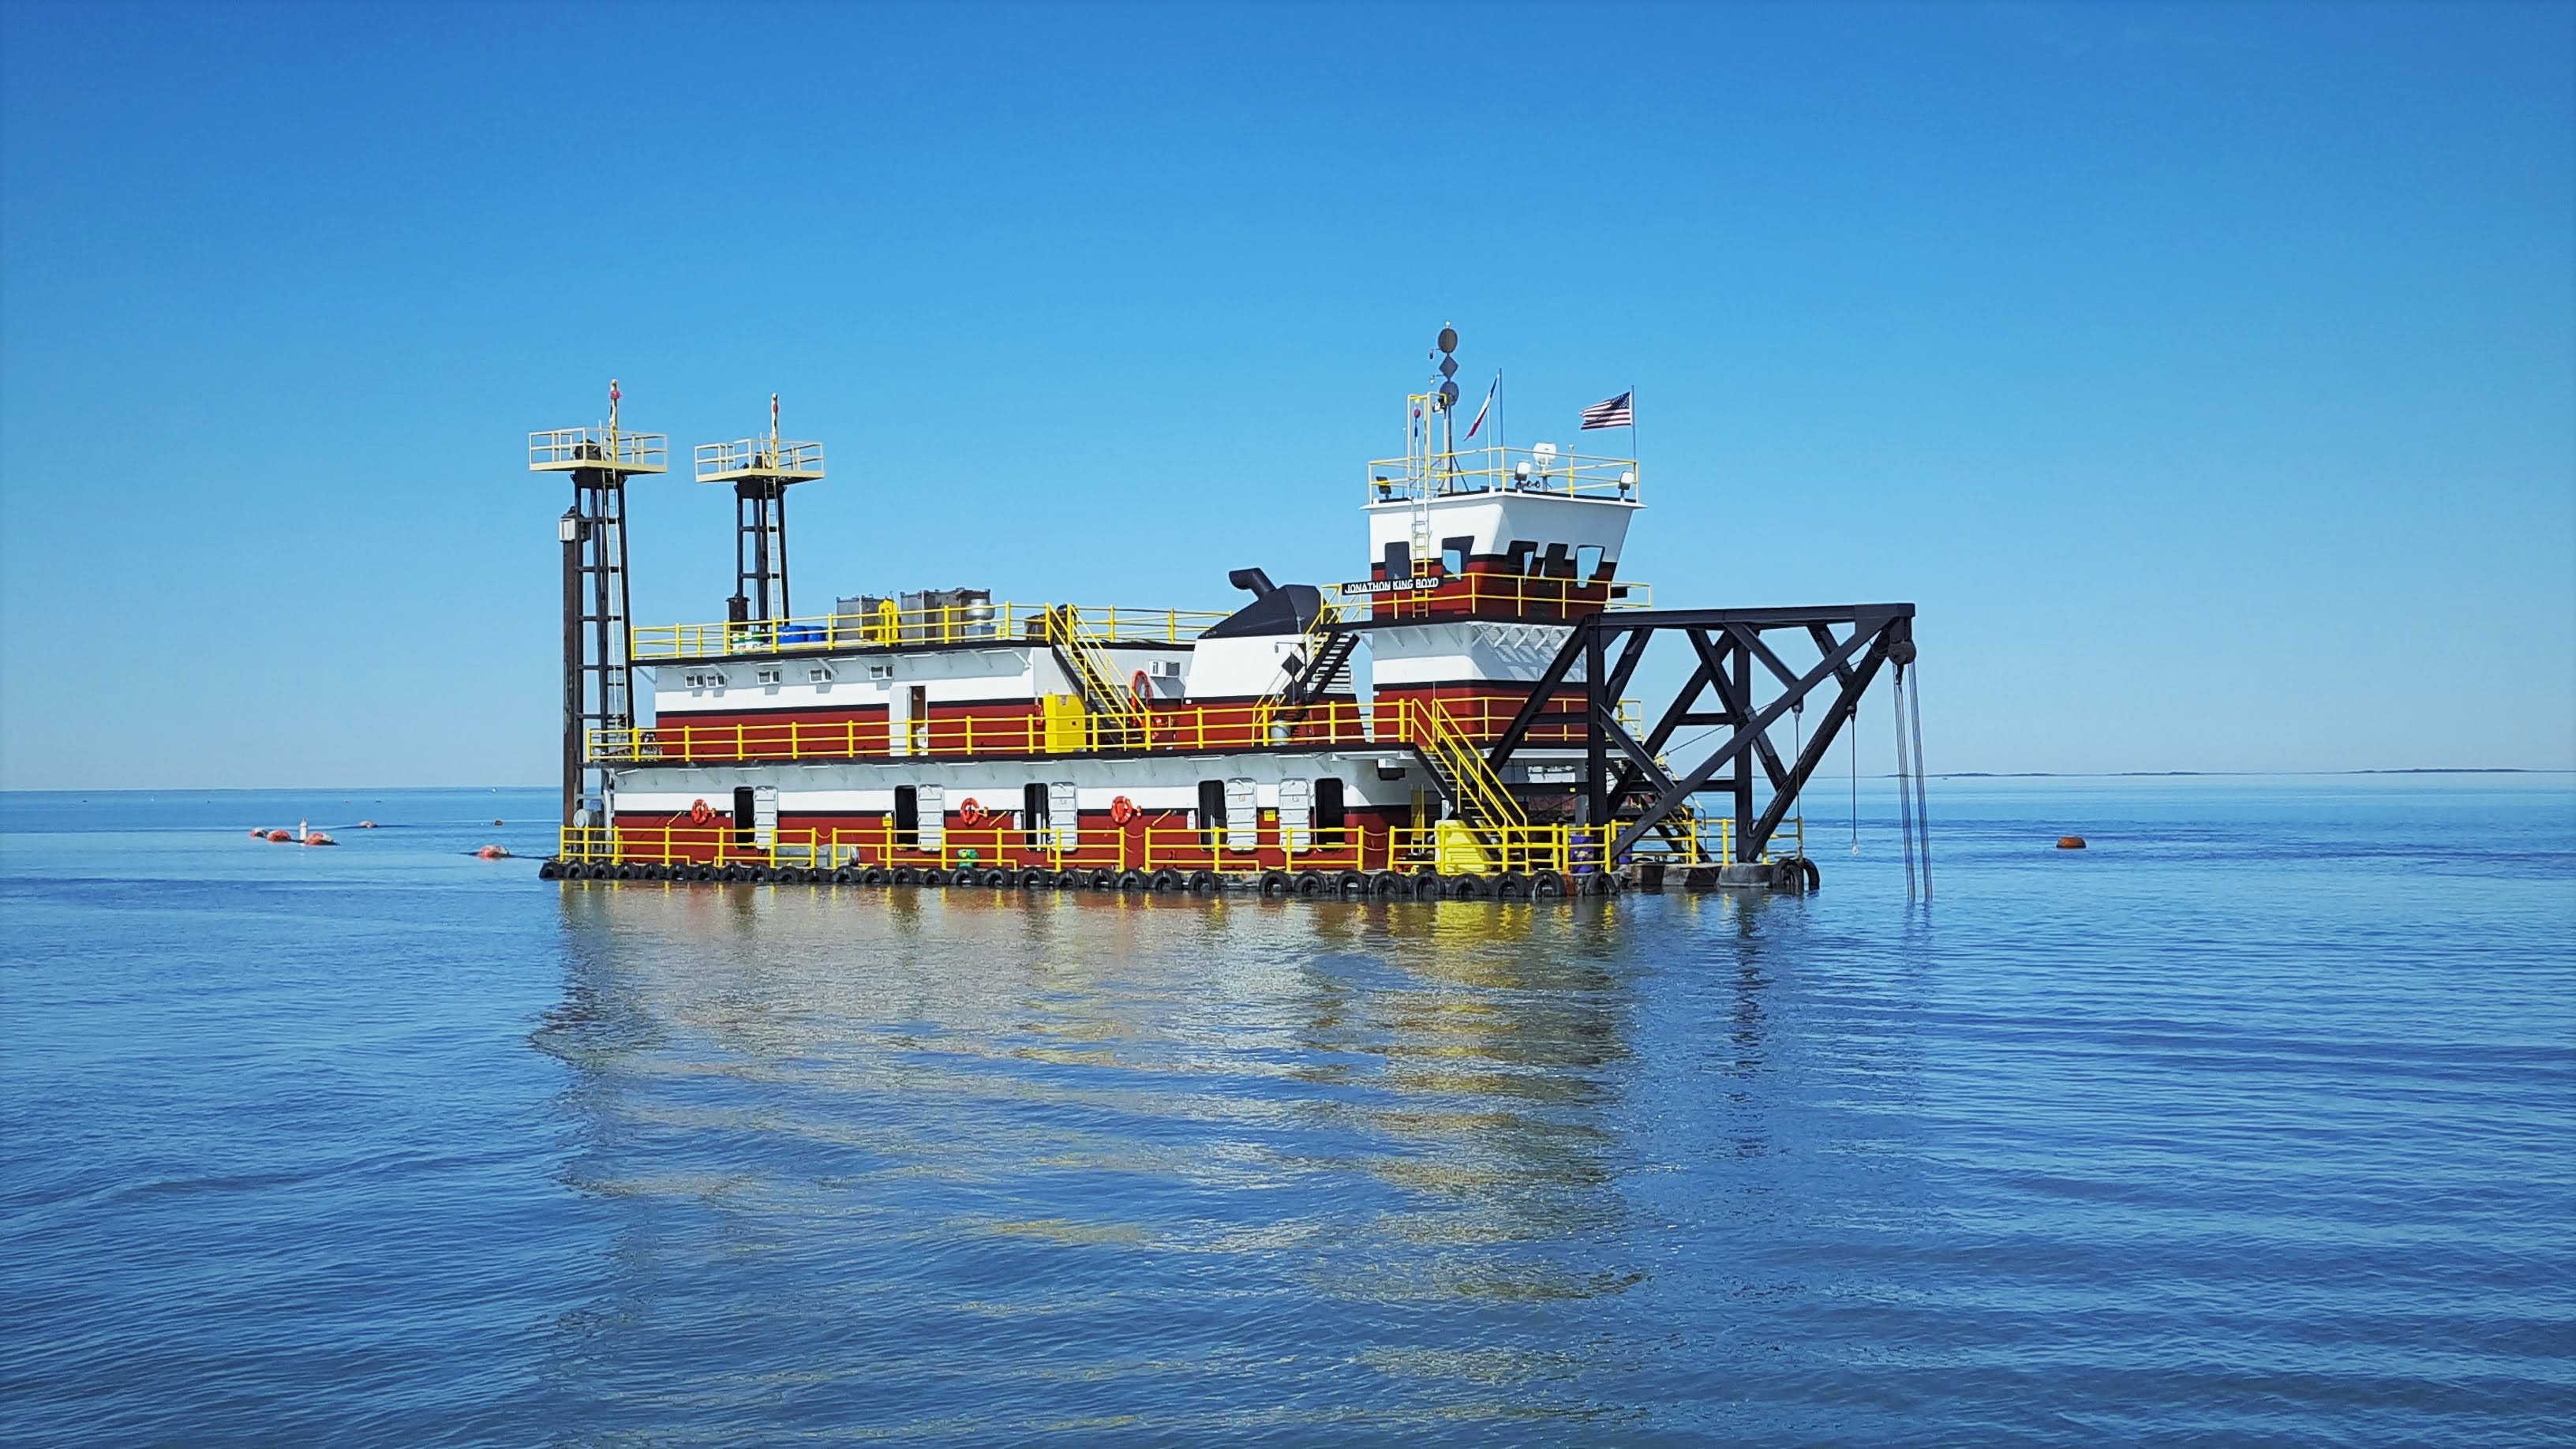 Encore Acquires The Dredging Division Assets Of RLB Contracting